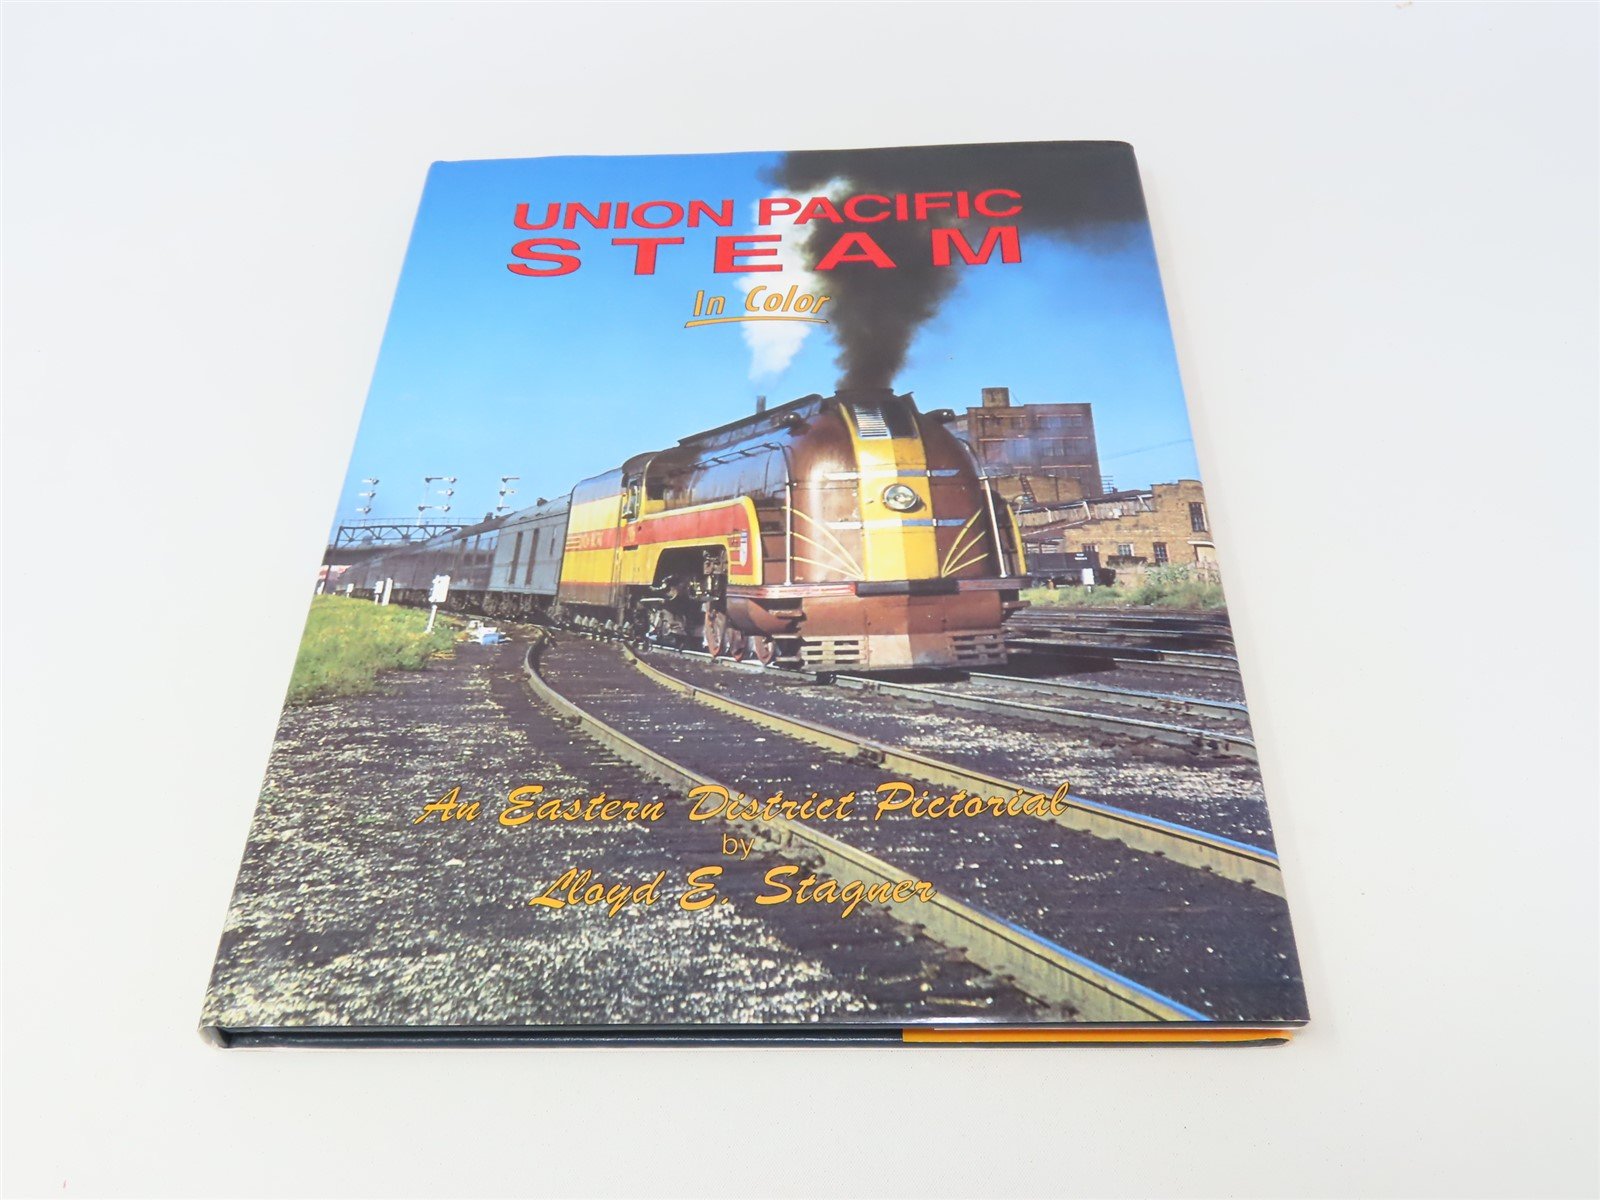 Morning Sun-Union Pacific Steam in Color by Lloyd E. Stagner ©1995 HC Book